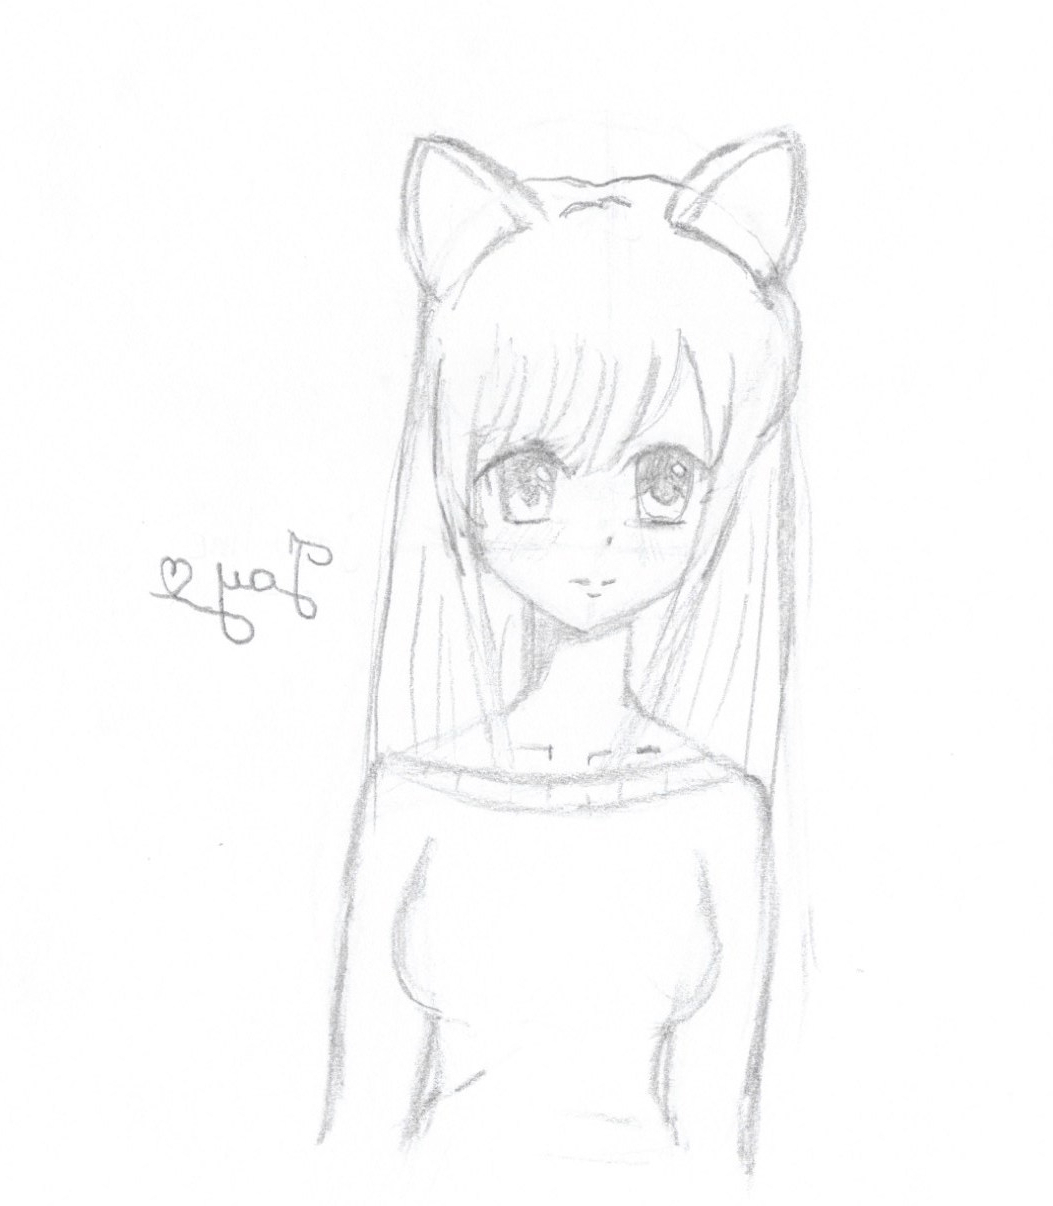 20 Latest Anime Girl Beginner Simple Easy Drawings Of Girls - Laily Azez